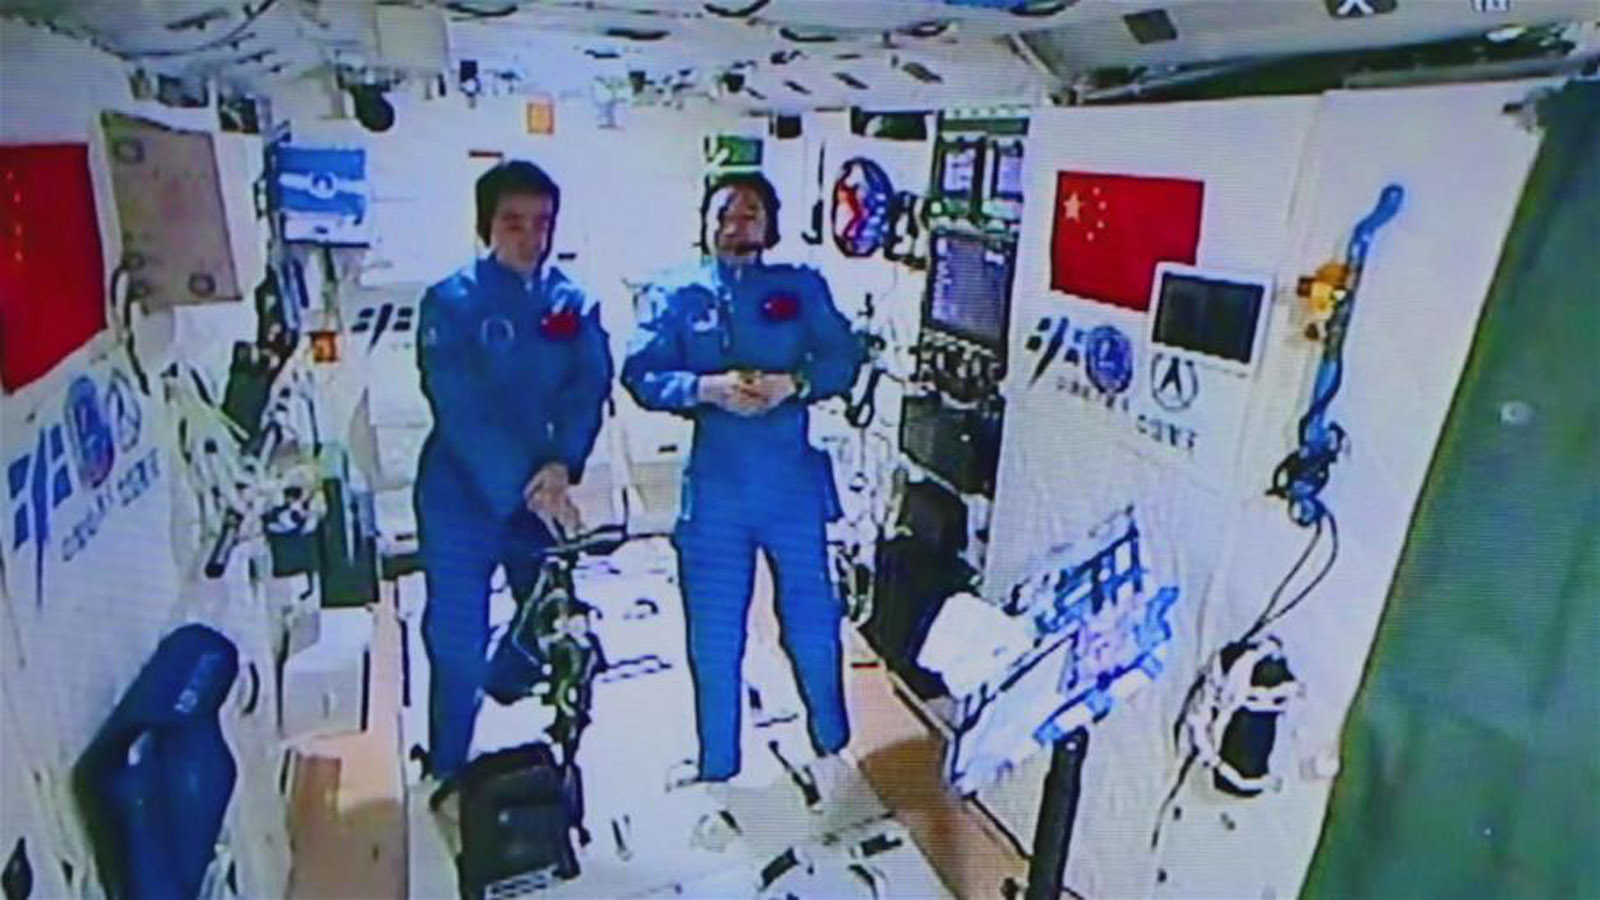 Shenzhou-11 astronauts depart space lab and begin journey home